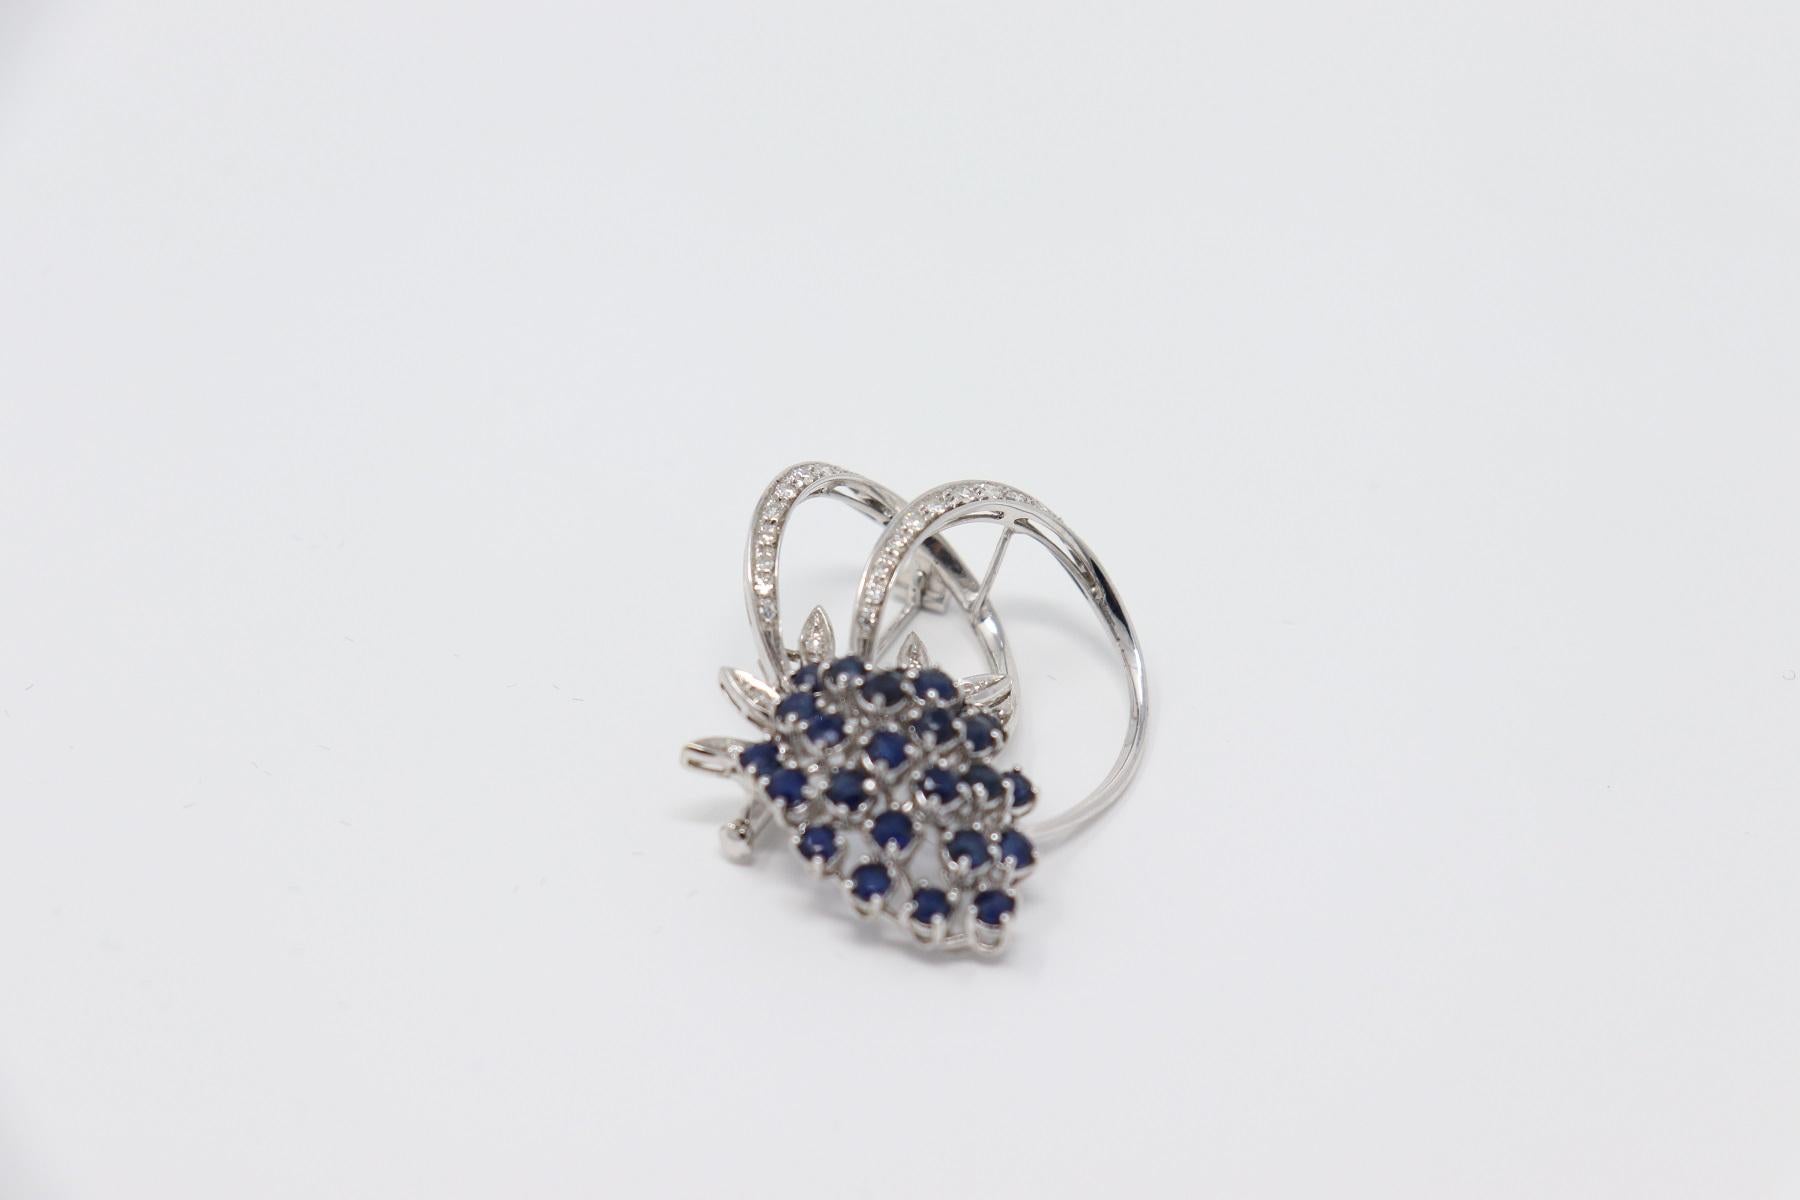 white gold fashion brooche with about 2.00 carat Blue Sapphires and 0.3 Carat diamonds. Perfect for an elegant and refined woman.
Total weight: about 13,50 g.
New contemporary jewelry. Produced in the famous Italian city of gold Valenza. 
This